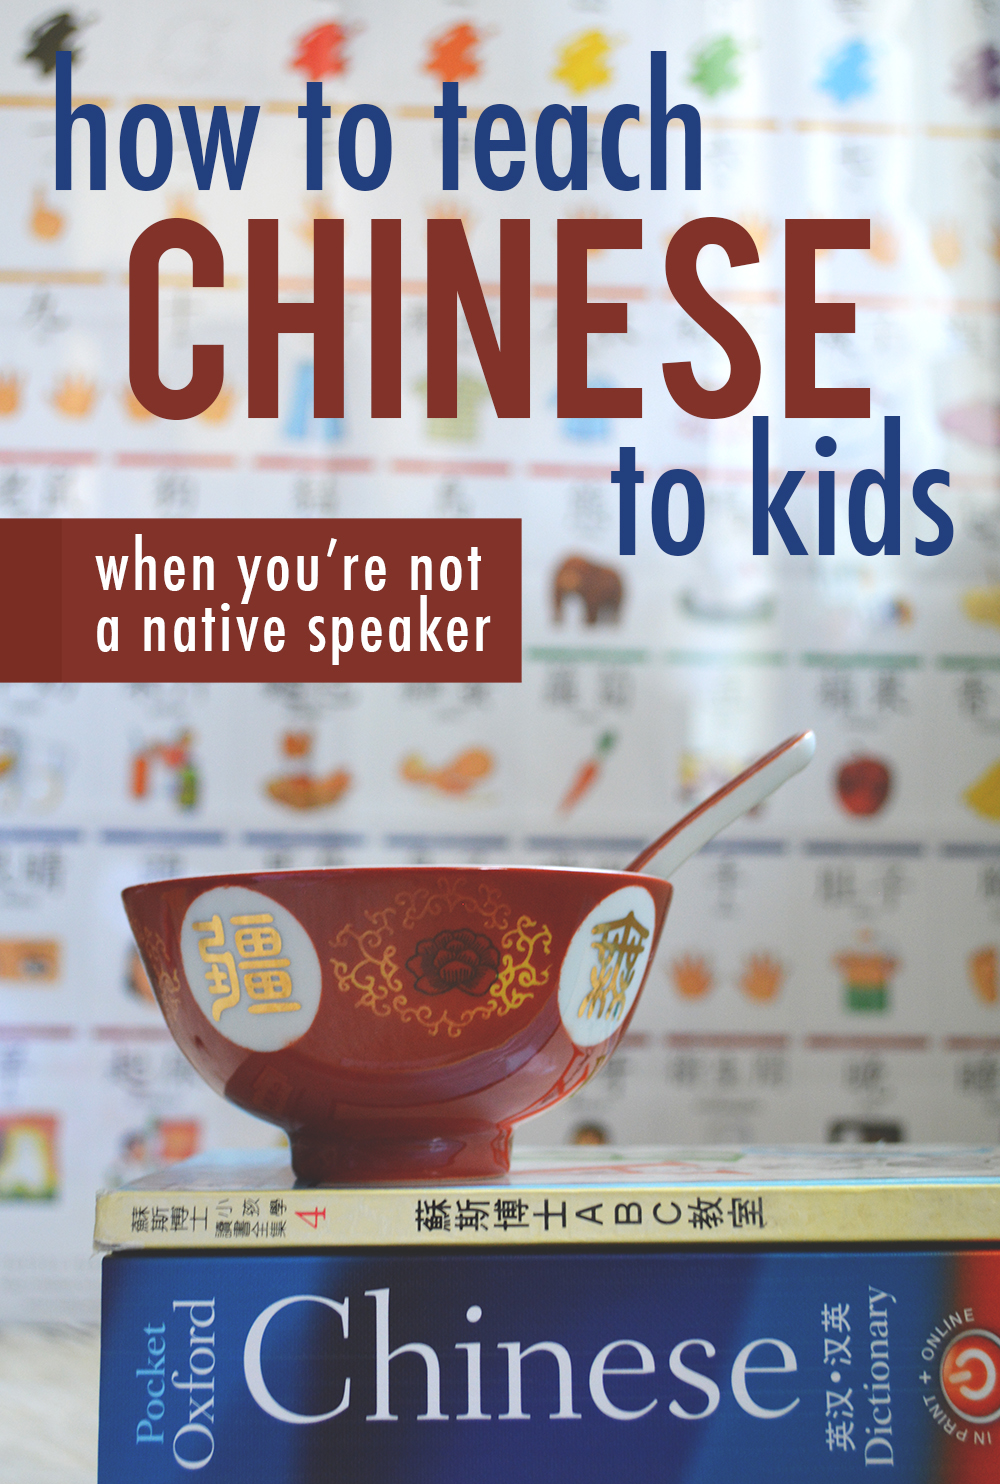 How to Teach Chinese to Kids (When It's Not Your Native Language) | A List of Easy Mandarin Chinese Learning Resources